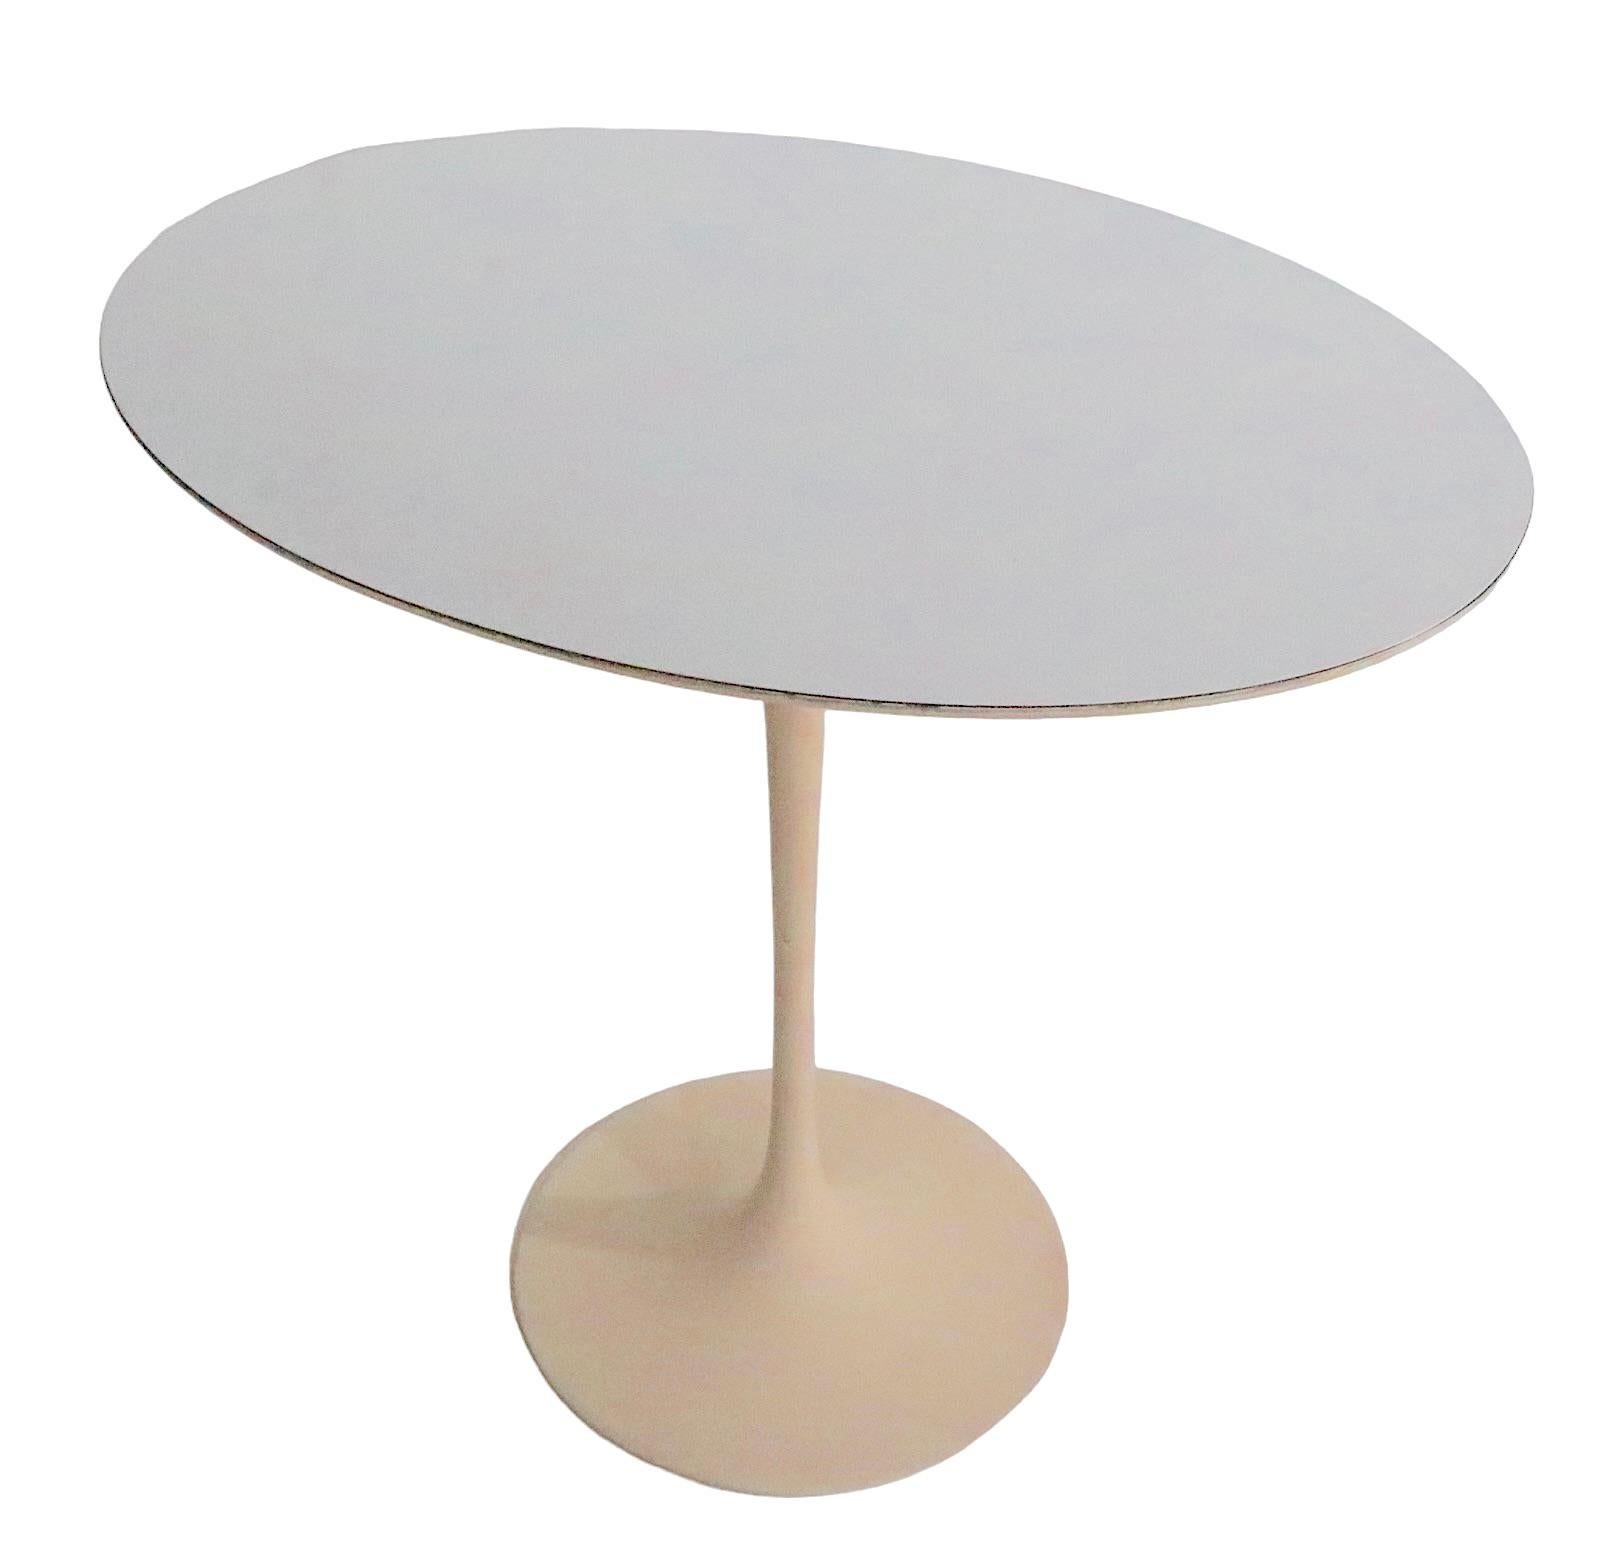 American Saarinen for Knoll Tulip Side Table 320 Park Ave  c 1960's For Sale